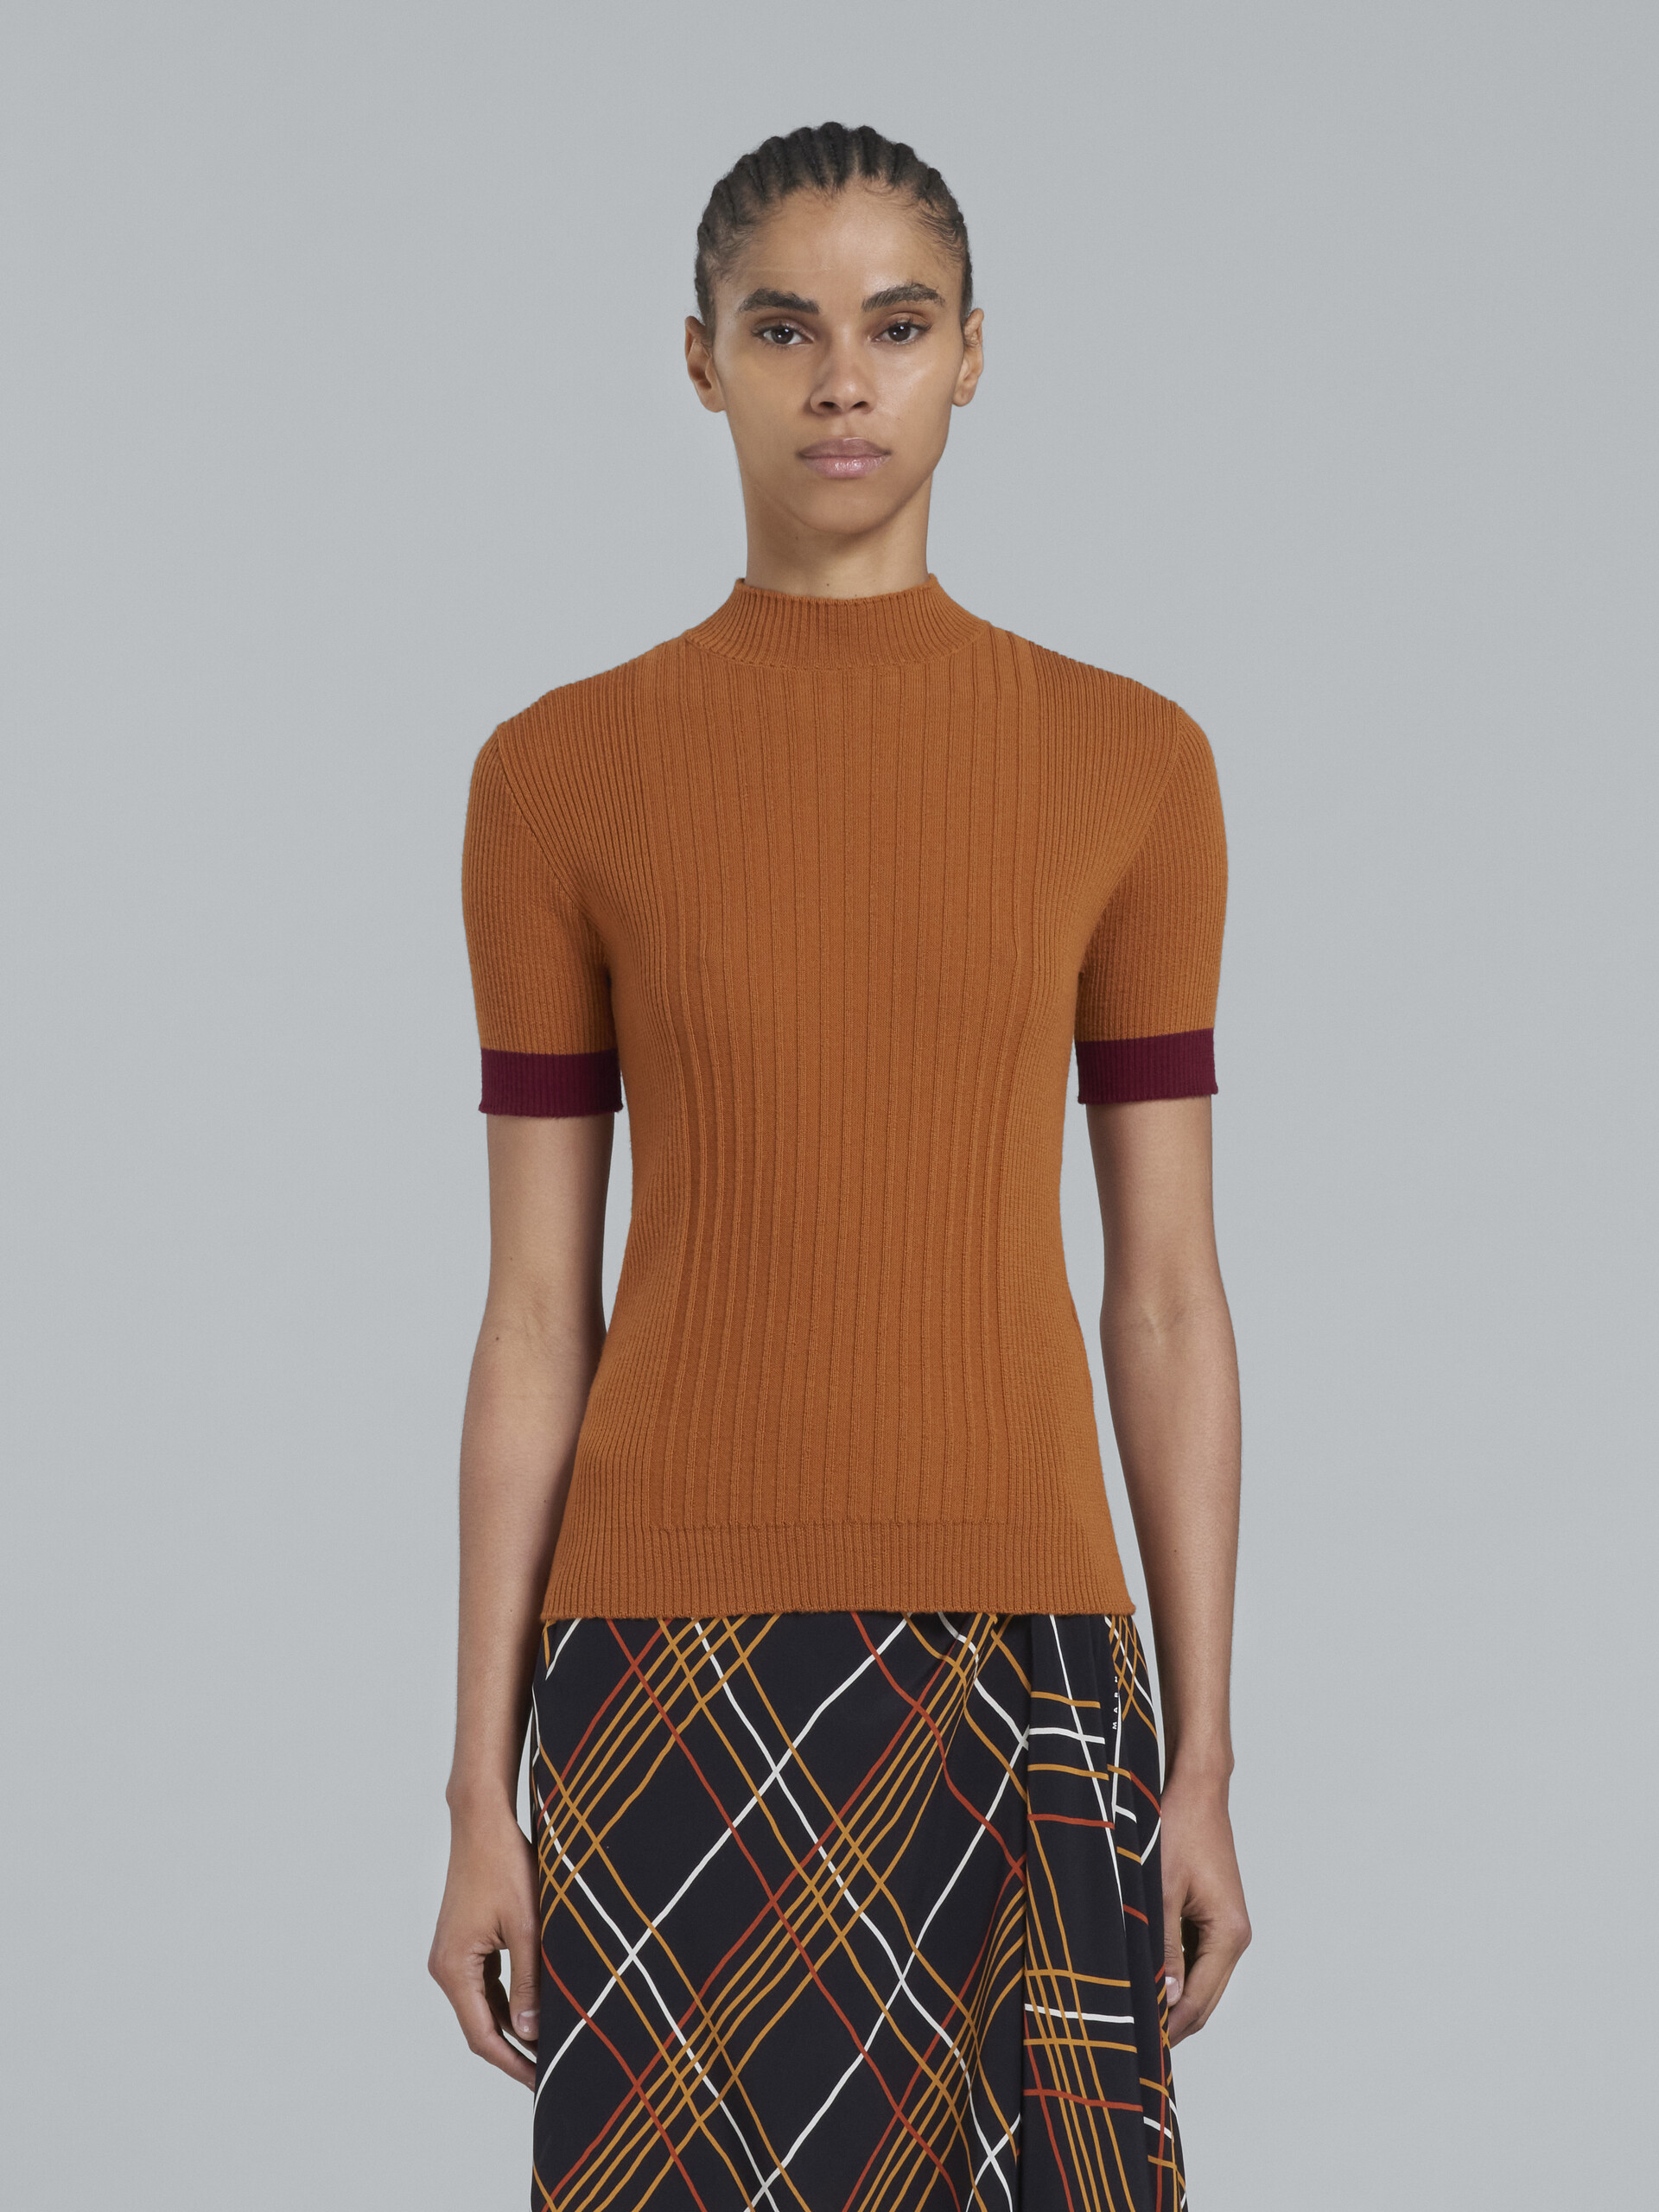 Orange wool turtleneck with contrasting cuffs - Pullovers - Image 2